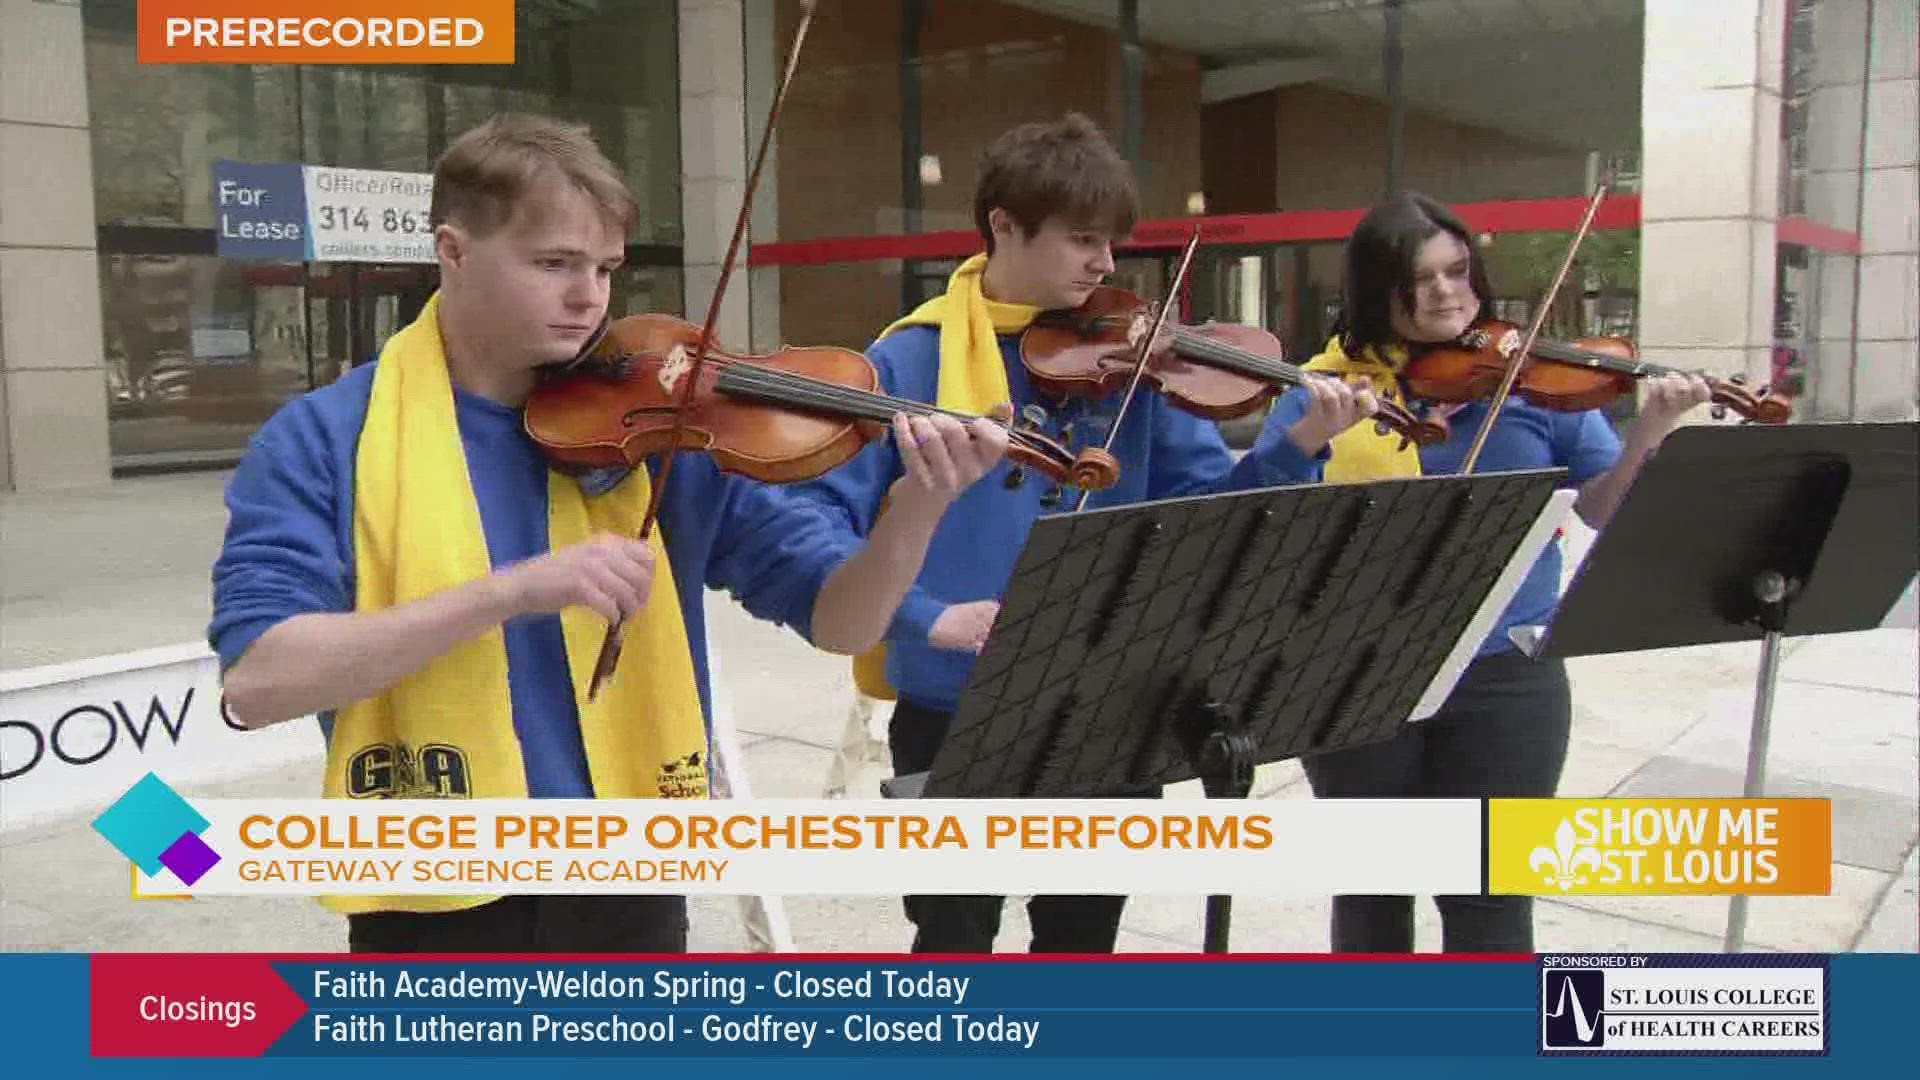 Tuesday morning, the College Prep Orchestra from Gateway Science Academy HS joined us on Television Plaza for a special performance.